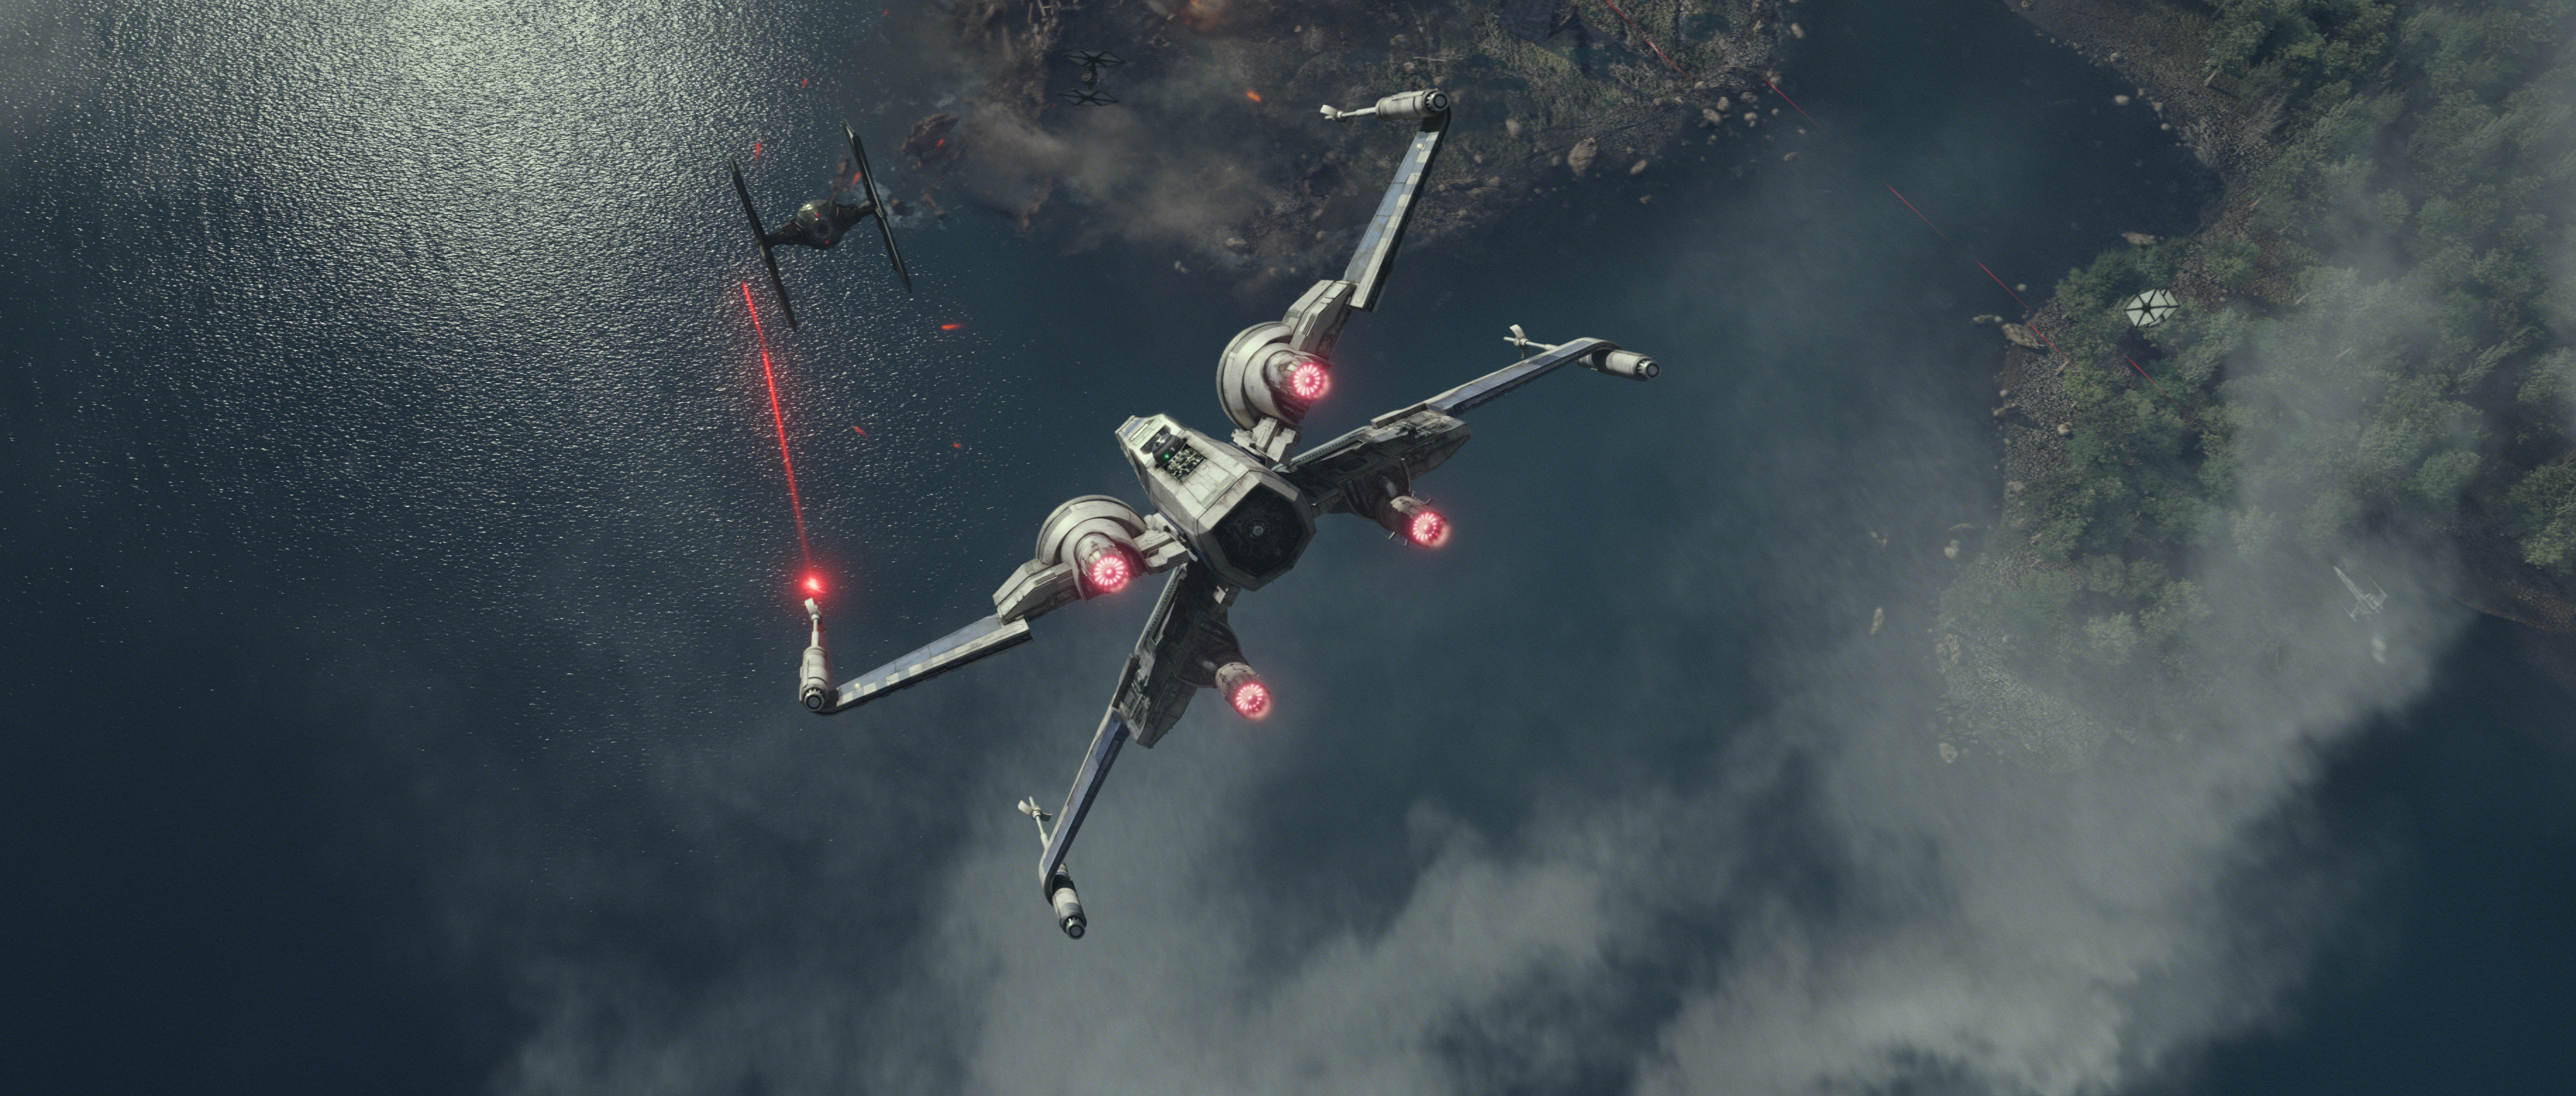 Star Wars Image Are Perfect For Desktop Wallpaper Collider